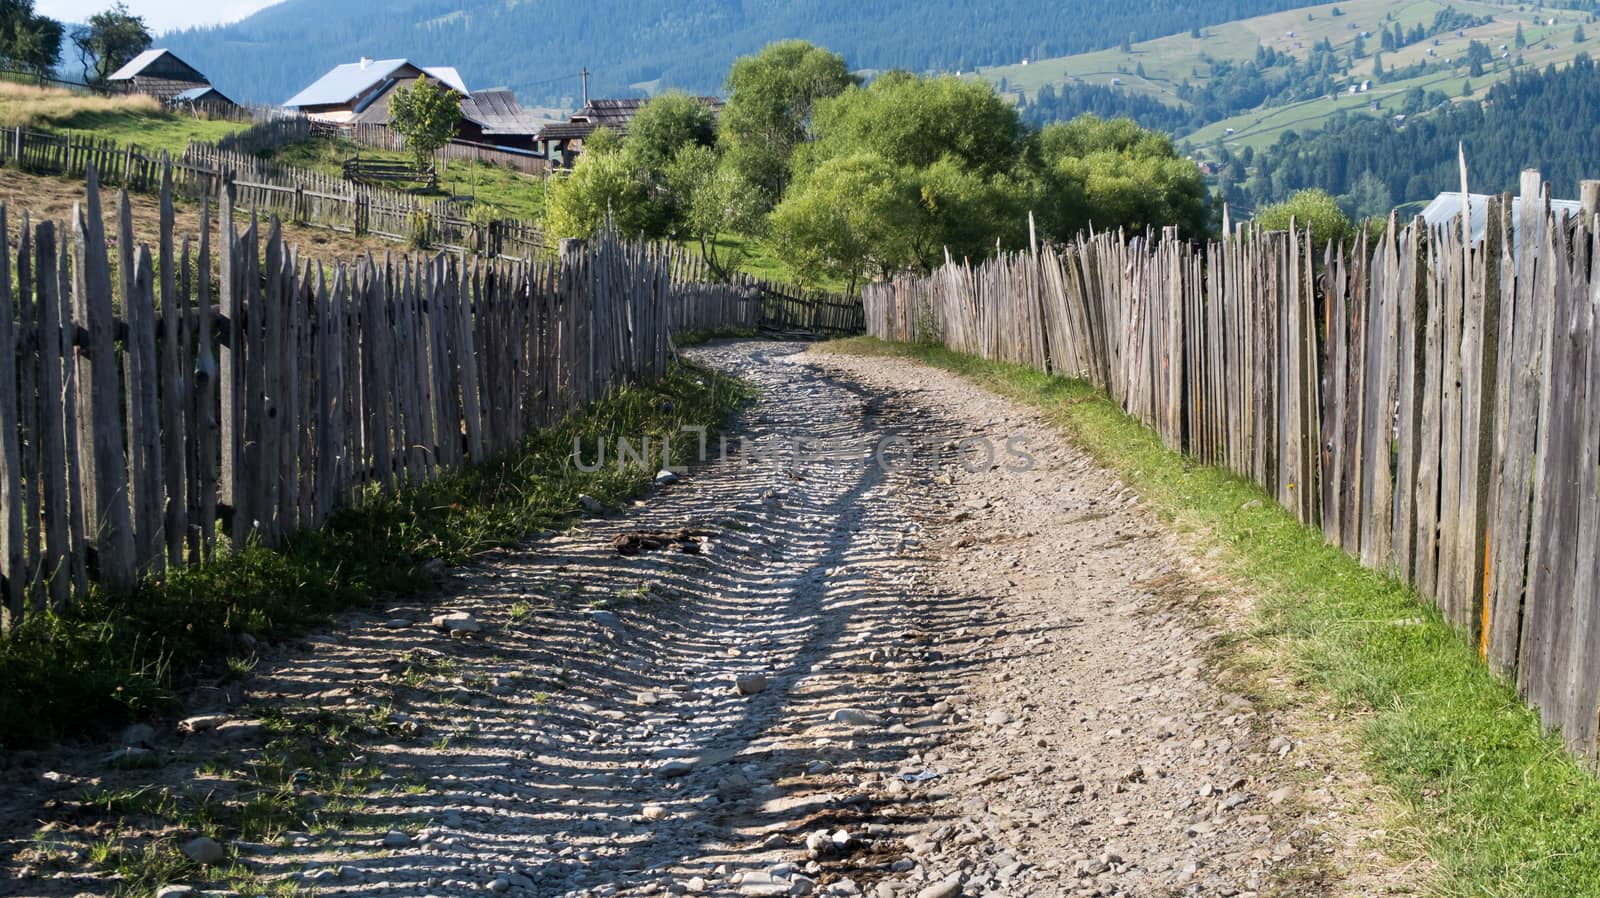 Road with ballast in the mountains with houses - fence in the mountains